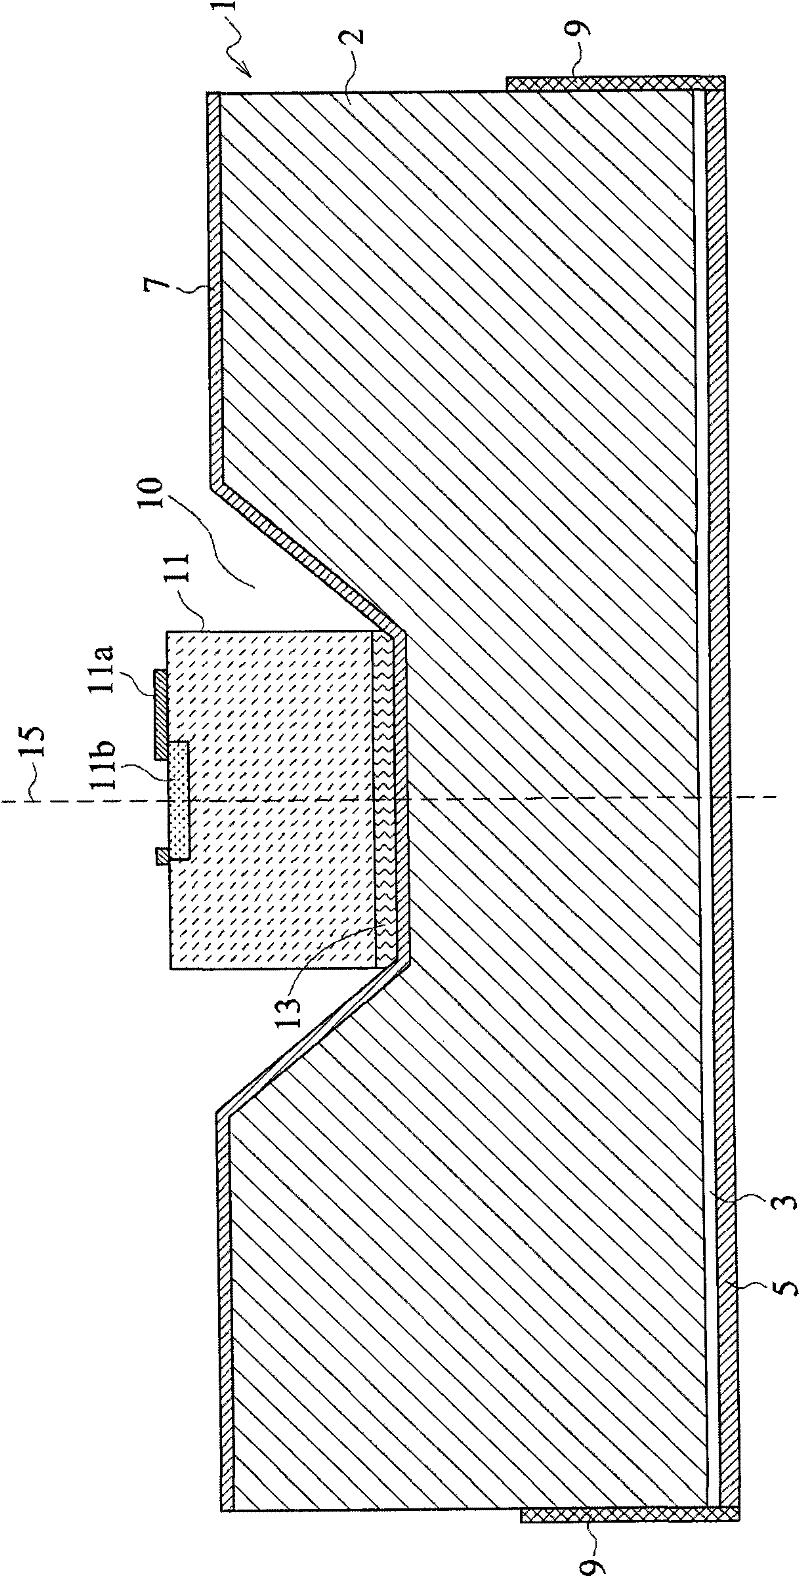 Hybrid stacked structure composed of photo diode and capacitive secondary base